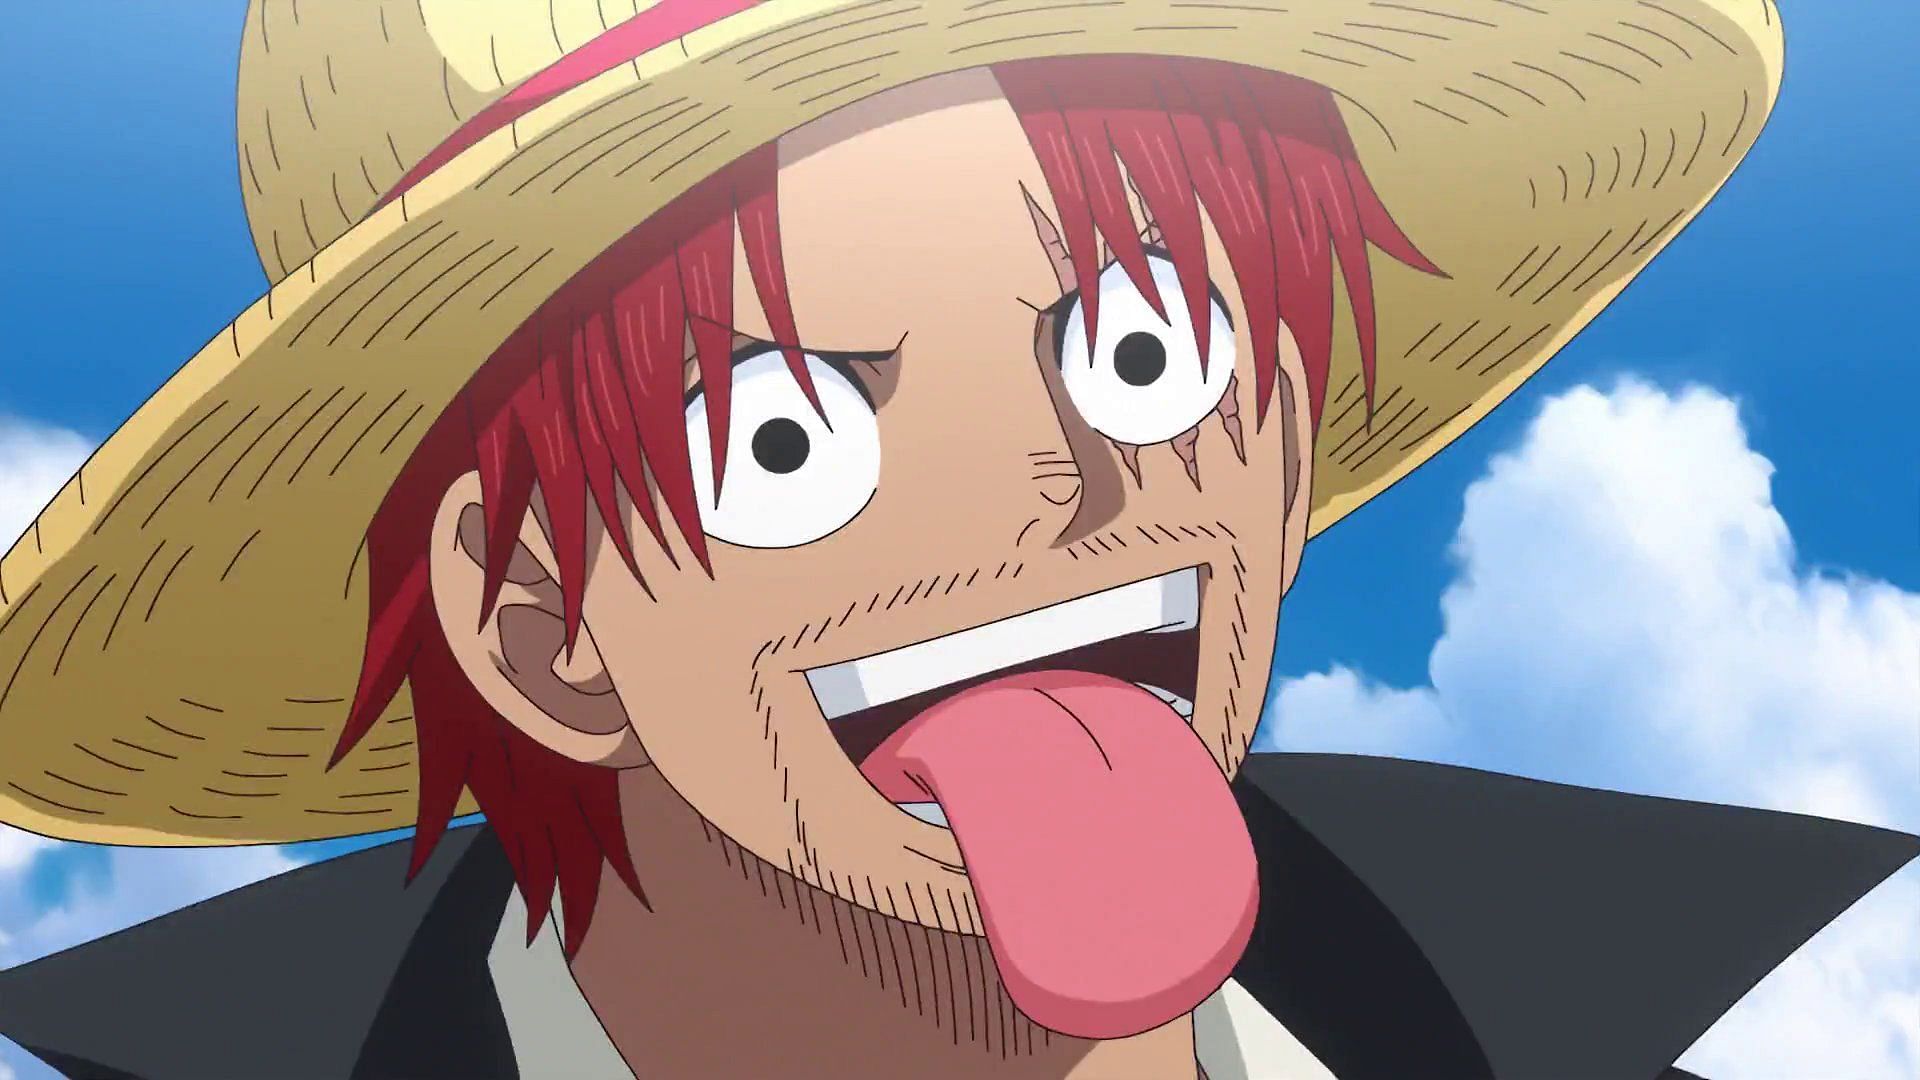 Fans have now taken to calling Shanks &quot;Haki-Man&quot; after his impressive use of Conqueror&#039;s in One Piece Chapter 1055 (Image Credits: Eiichiro Oda/Shueisha, Viz Media, One Piece)